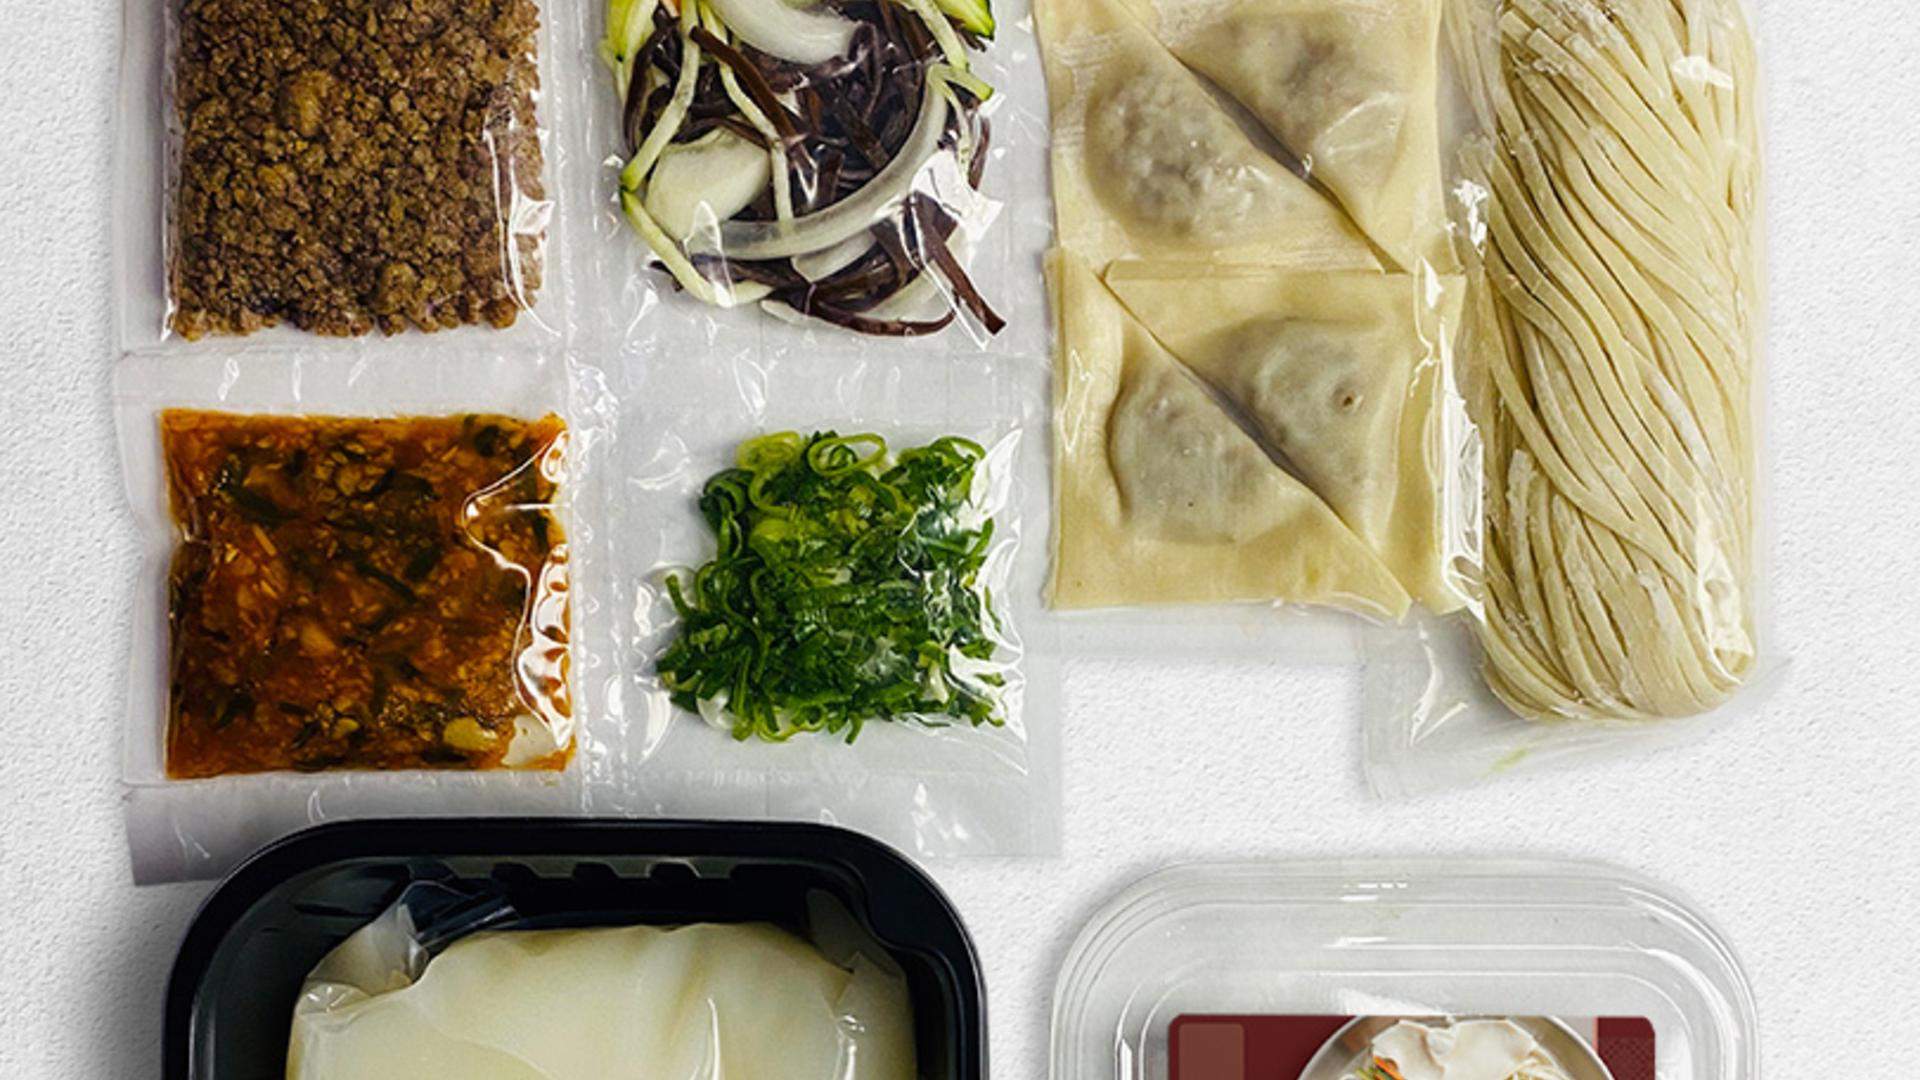 Market Seoul Soul Is Melbourne's New Korean Food Delivery Service from Four Top Restaurants